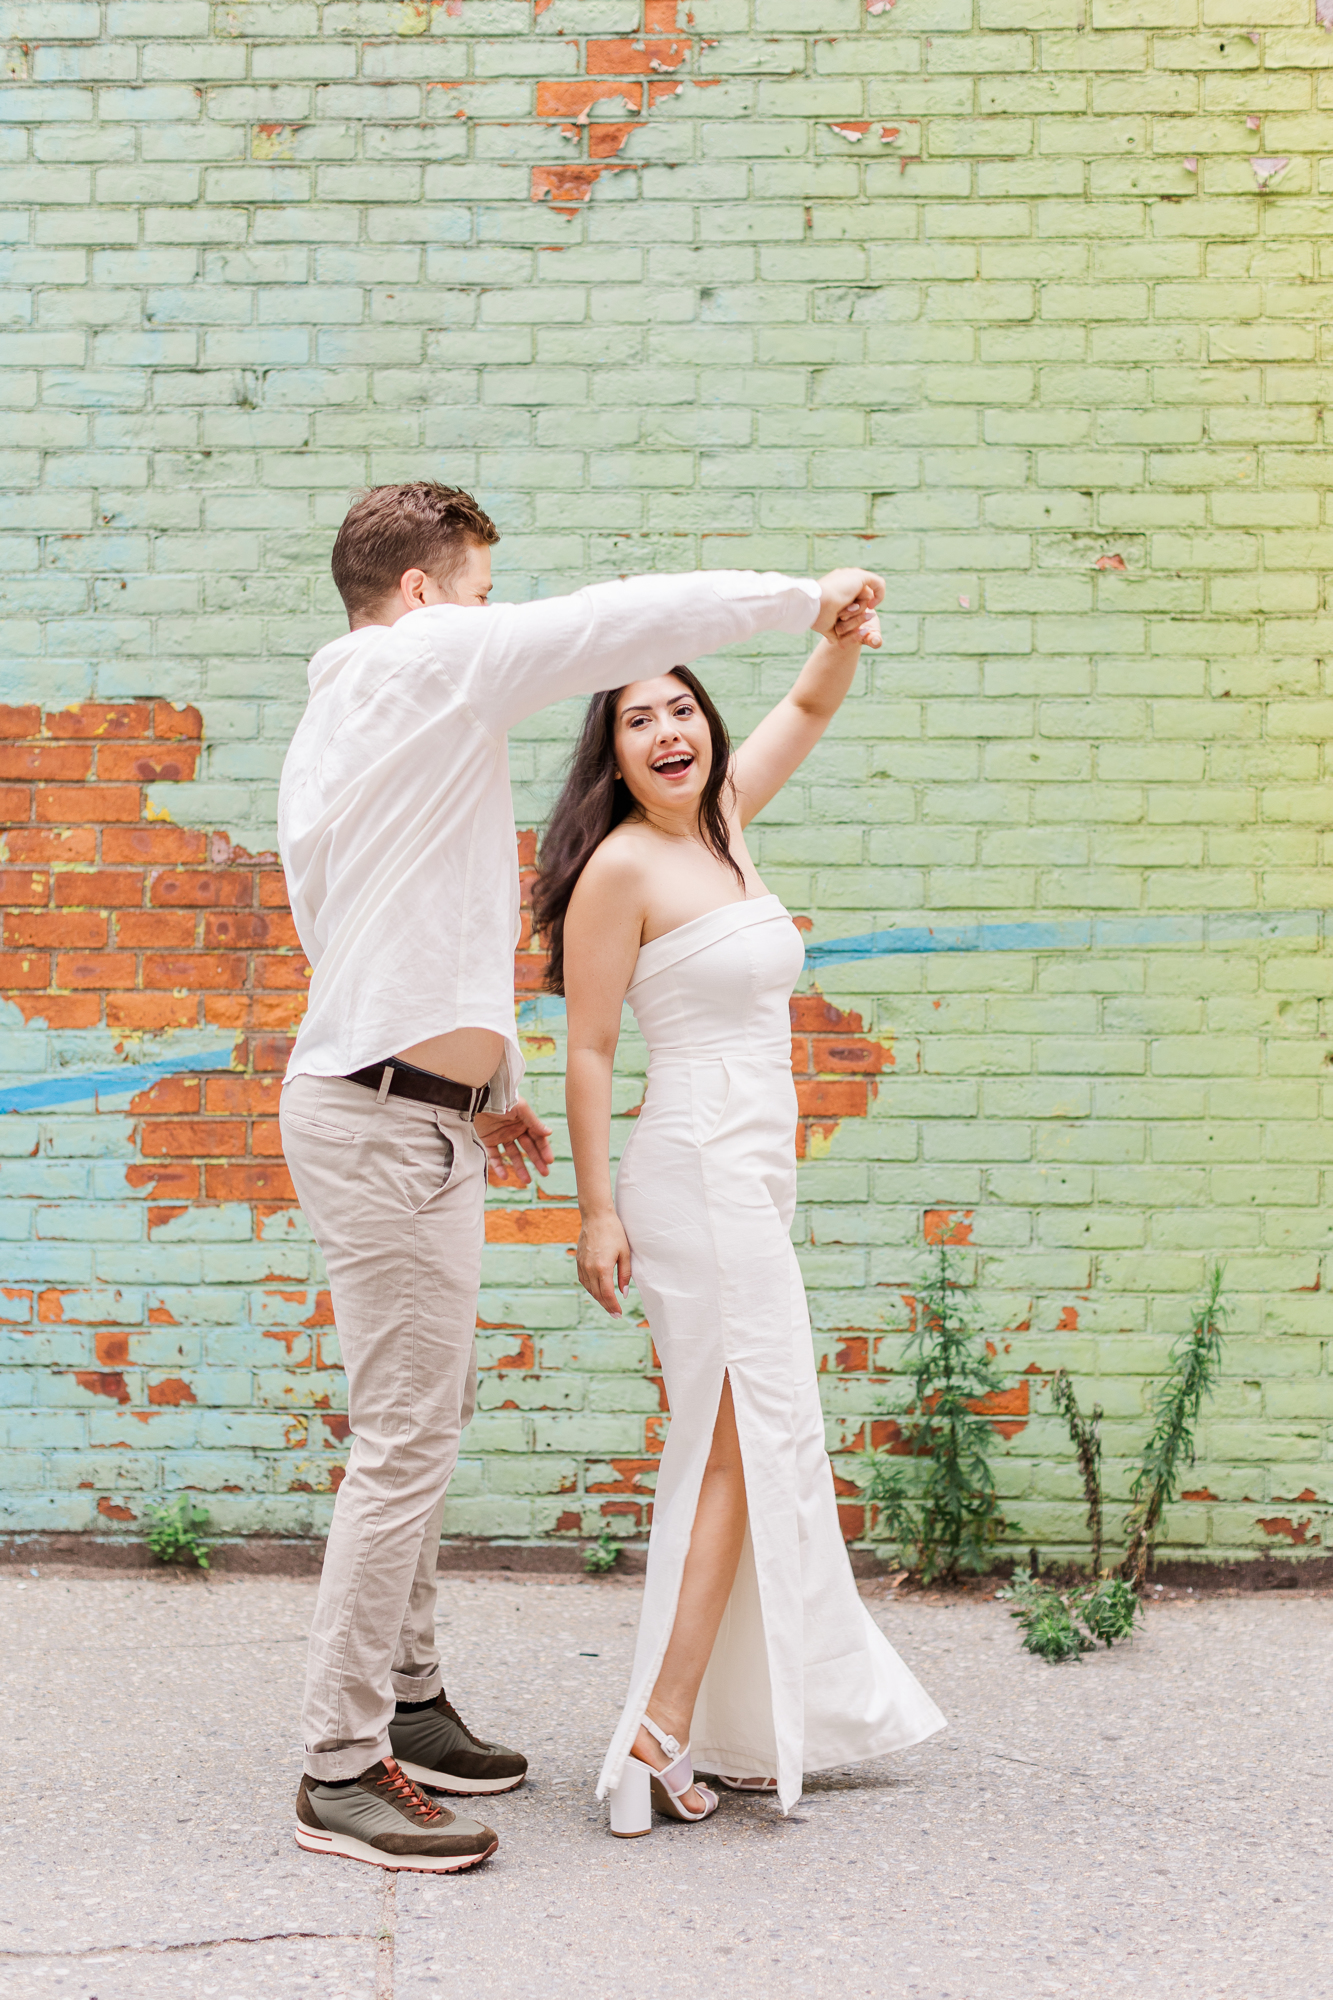 Charming Engagement Photography on the Brooklyn Bridge